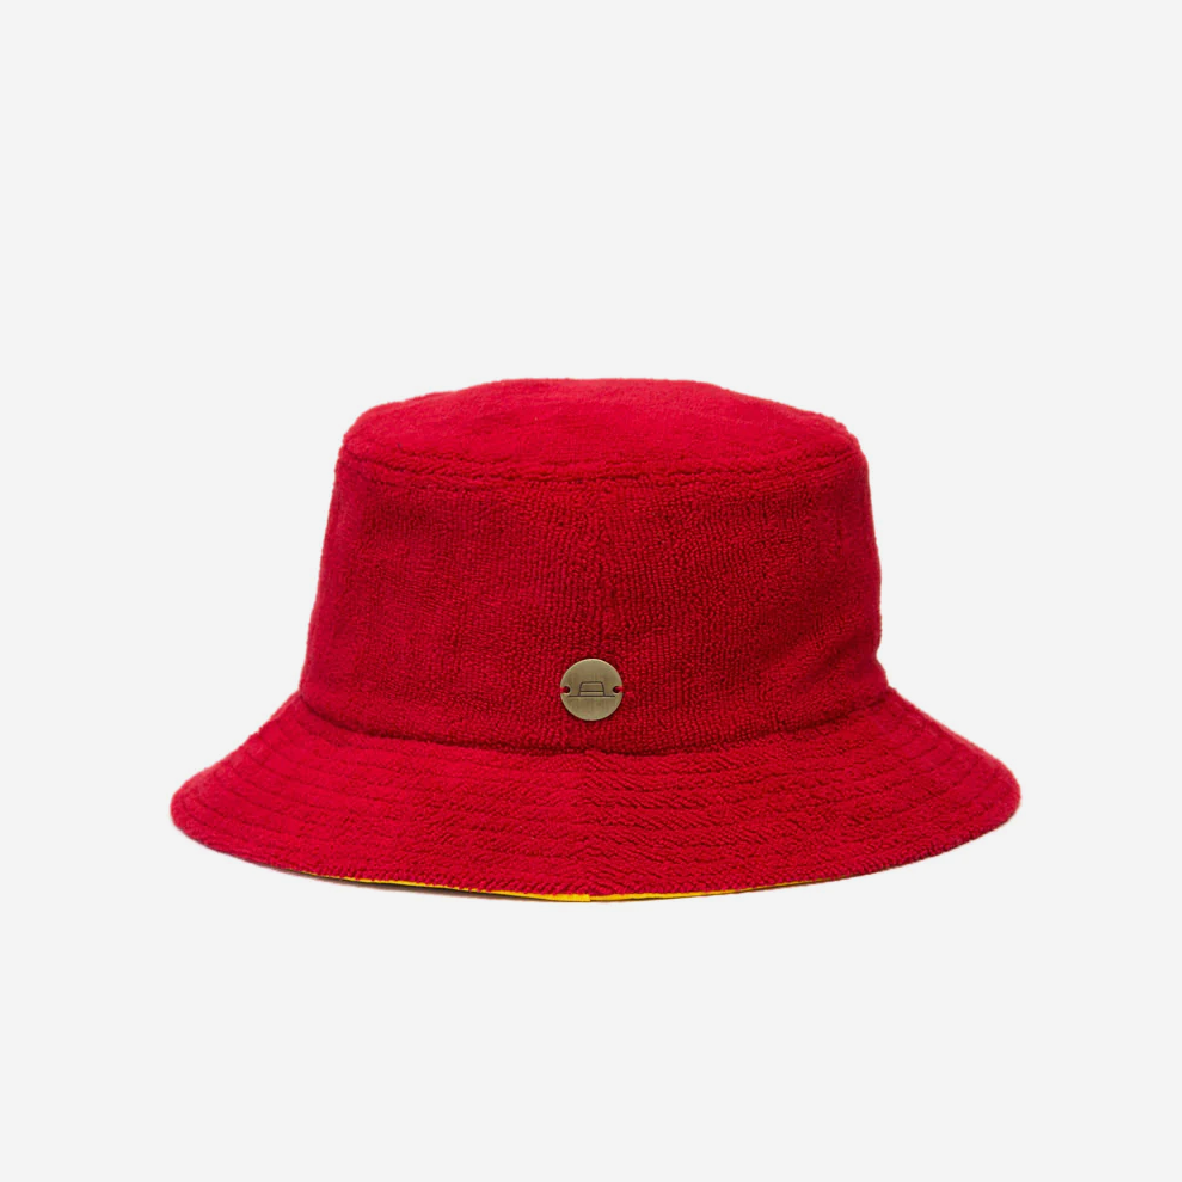 Towelling Bucket Hat - Red & Yellow